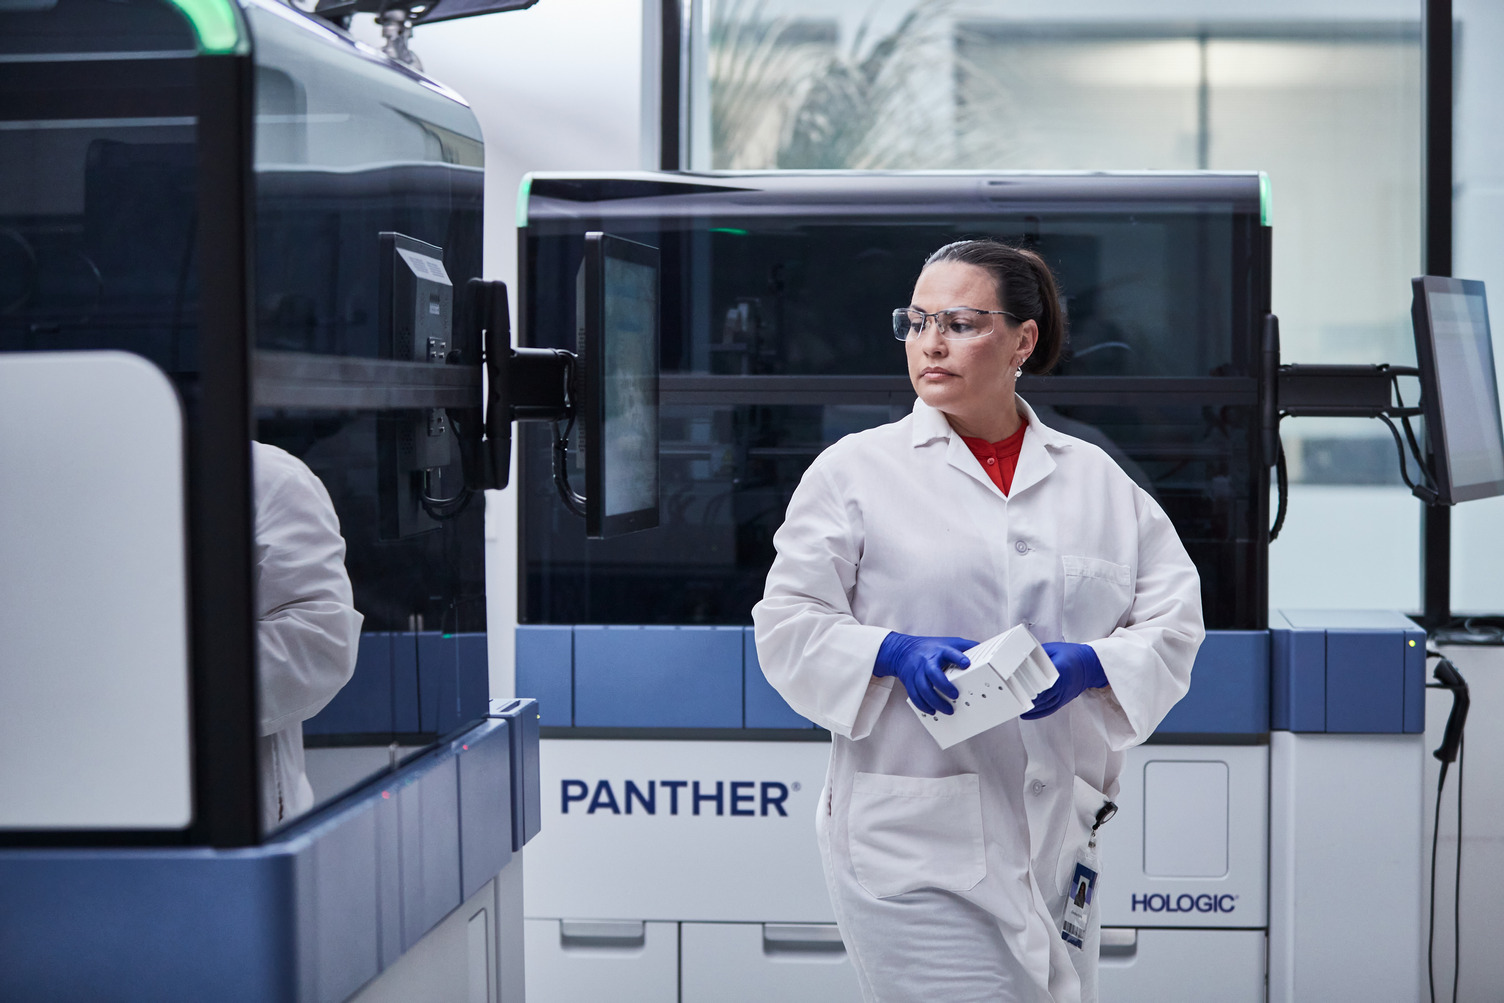 Lab technician walking through Panther systems in lab setting.